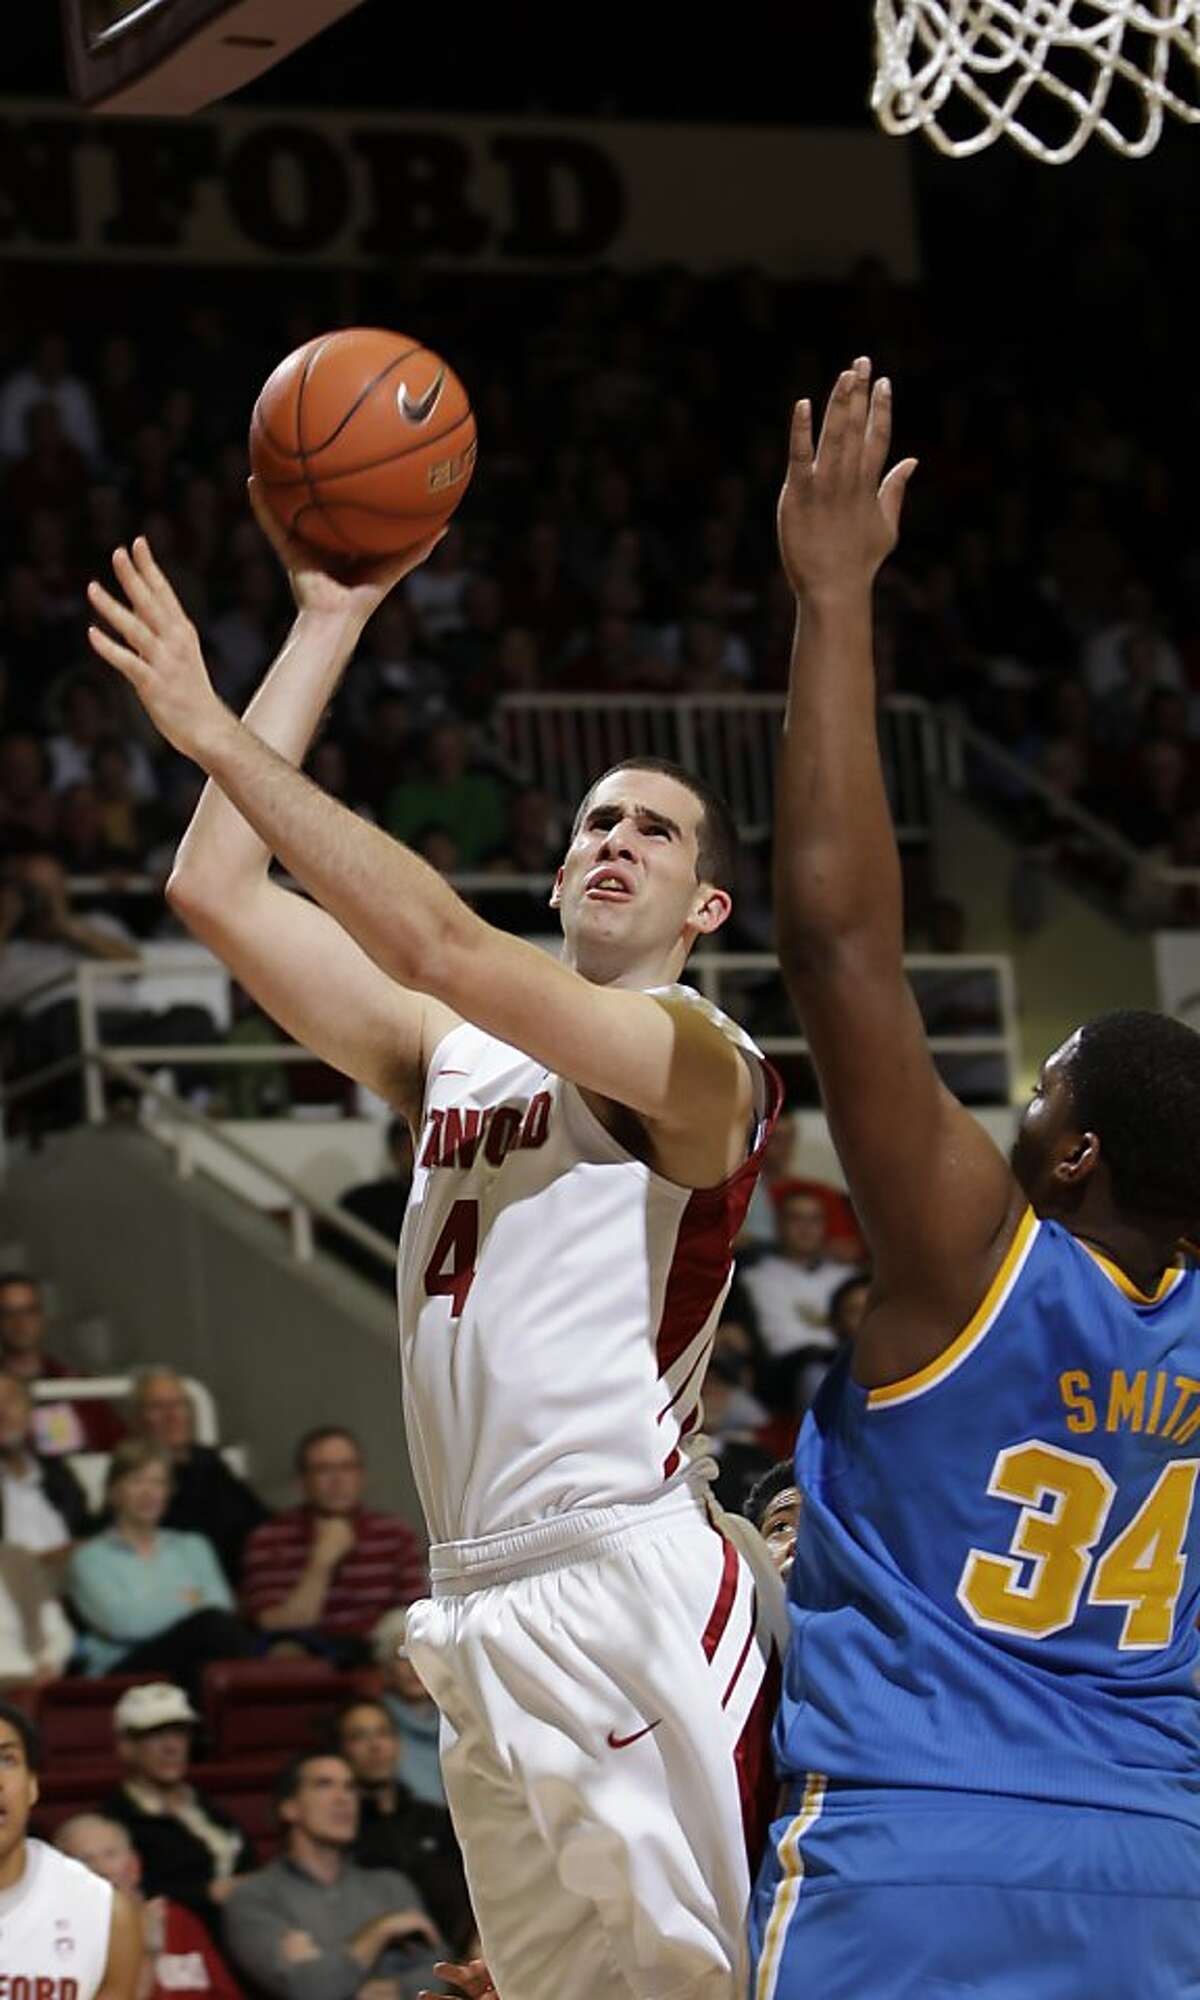 Stanford center Stefan Nastic (4) scores over UCLA center Joshua Smith (34) in the first half of an NCAA college basketball game in Stanford, Calif., Thursday, Dec. 29, 2011.